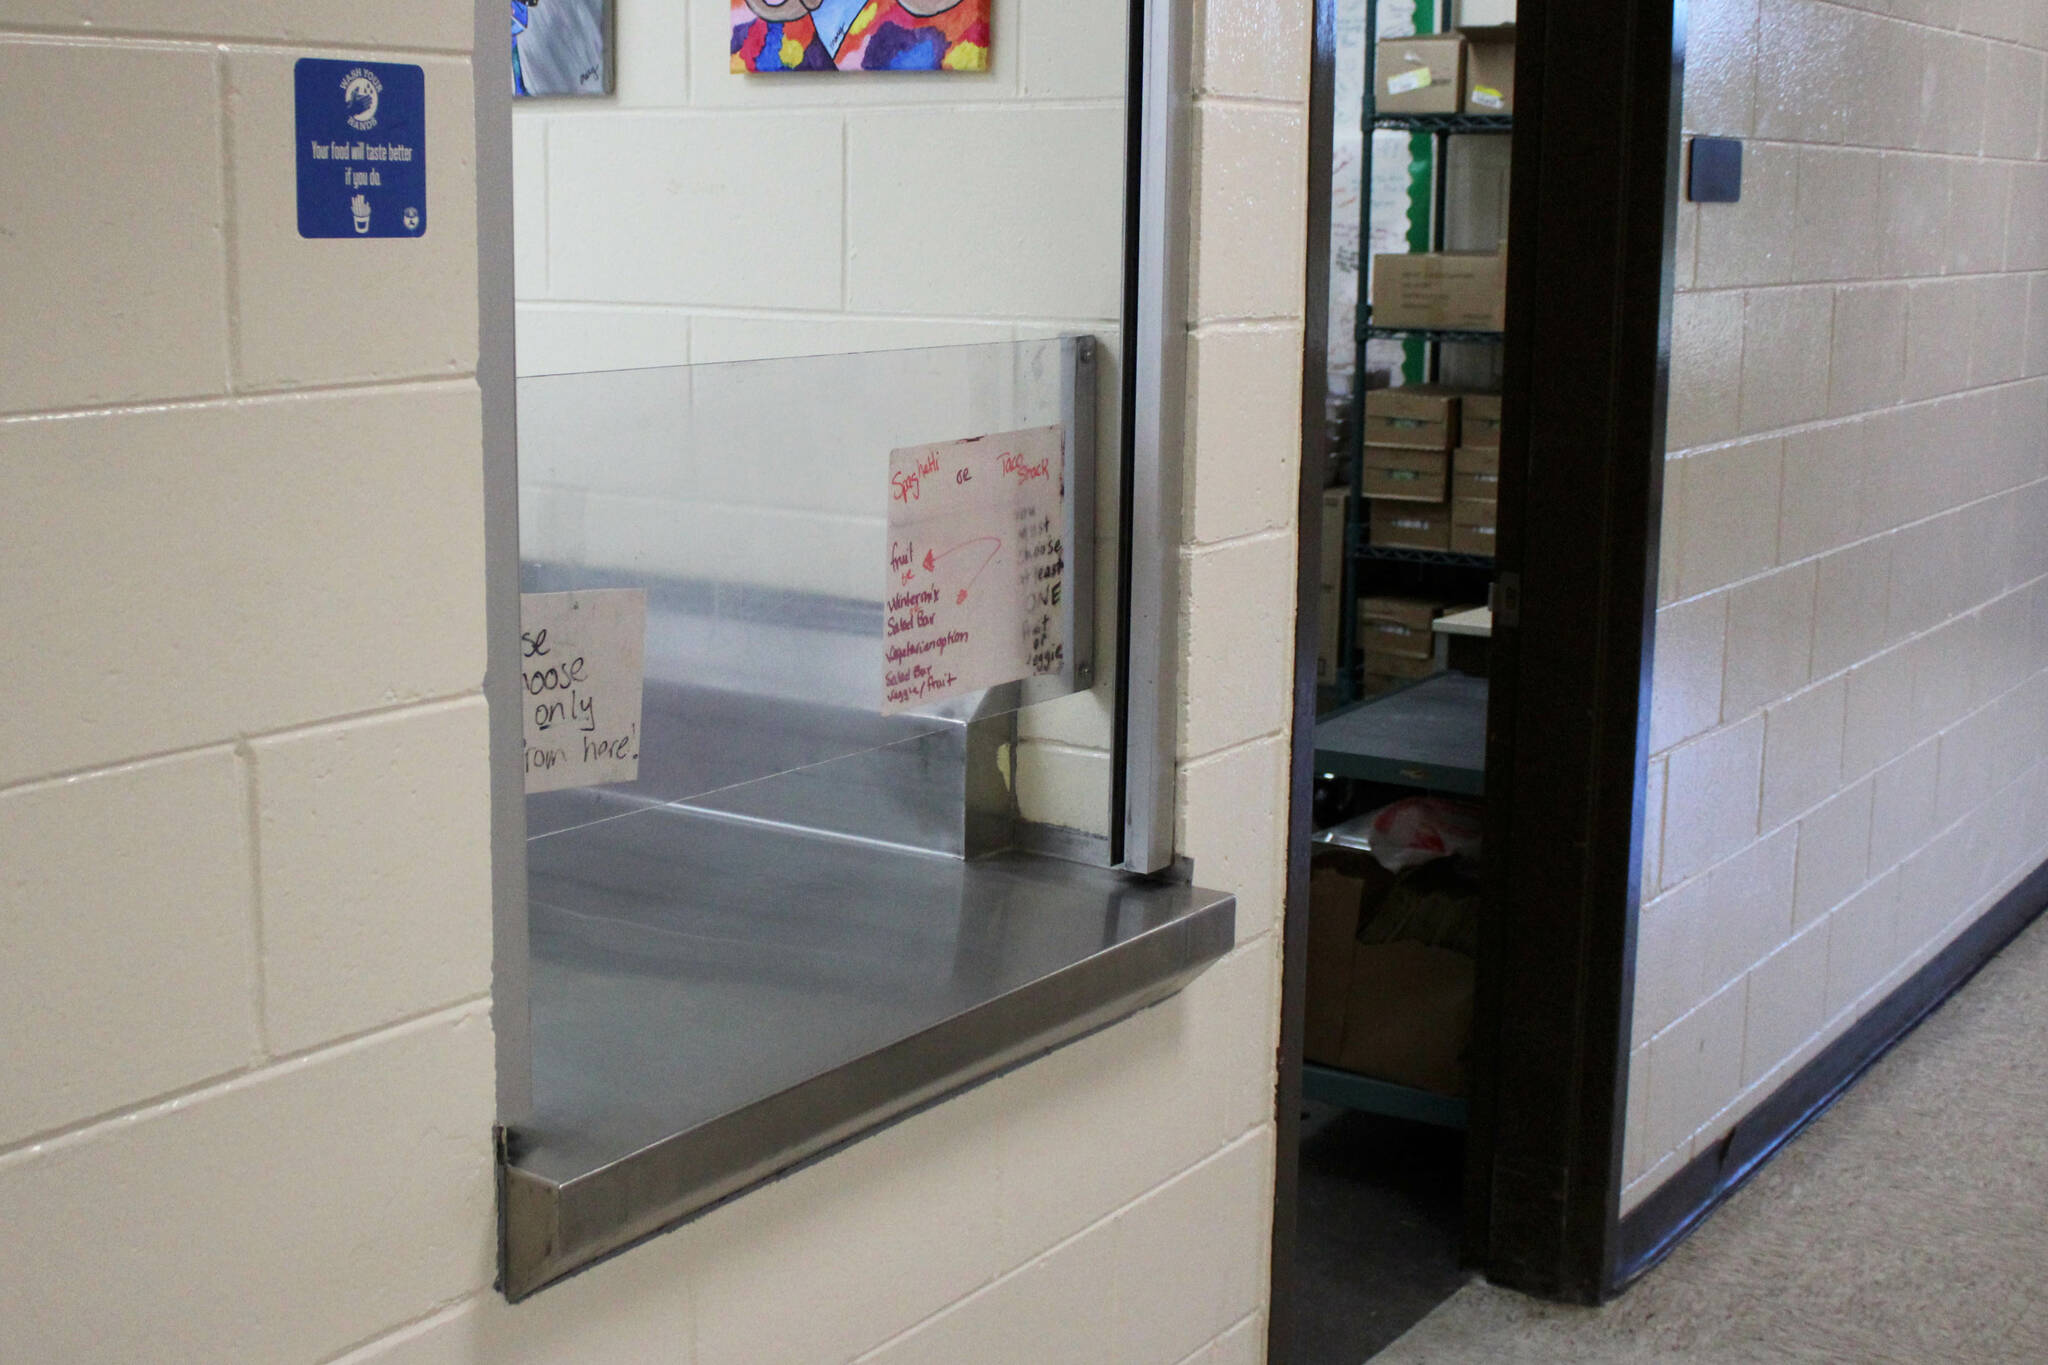 Notes are affixed to the cafeteria window, through which Principal Vaughn Dosko estimates 60% of students are given meals every day, at Kenai Middle School on Wednesday, Sept. 21, 2022, in Kenai, Alaska. (Ashlyn O’Hara/Peninsula Clarion)